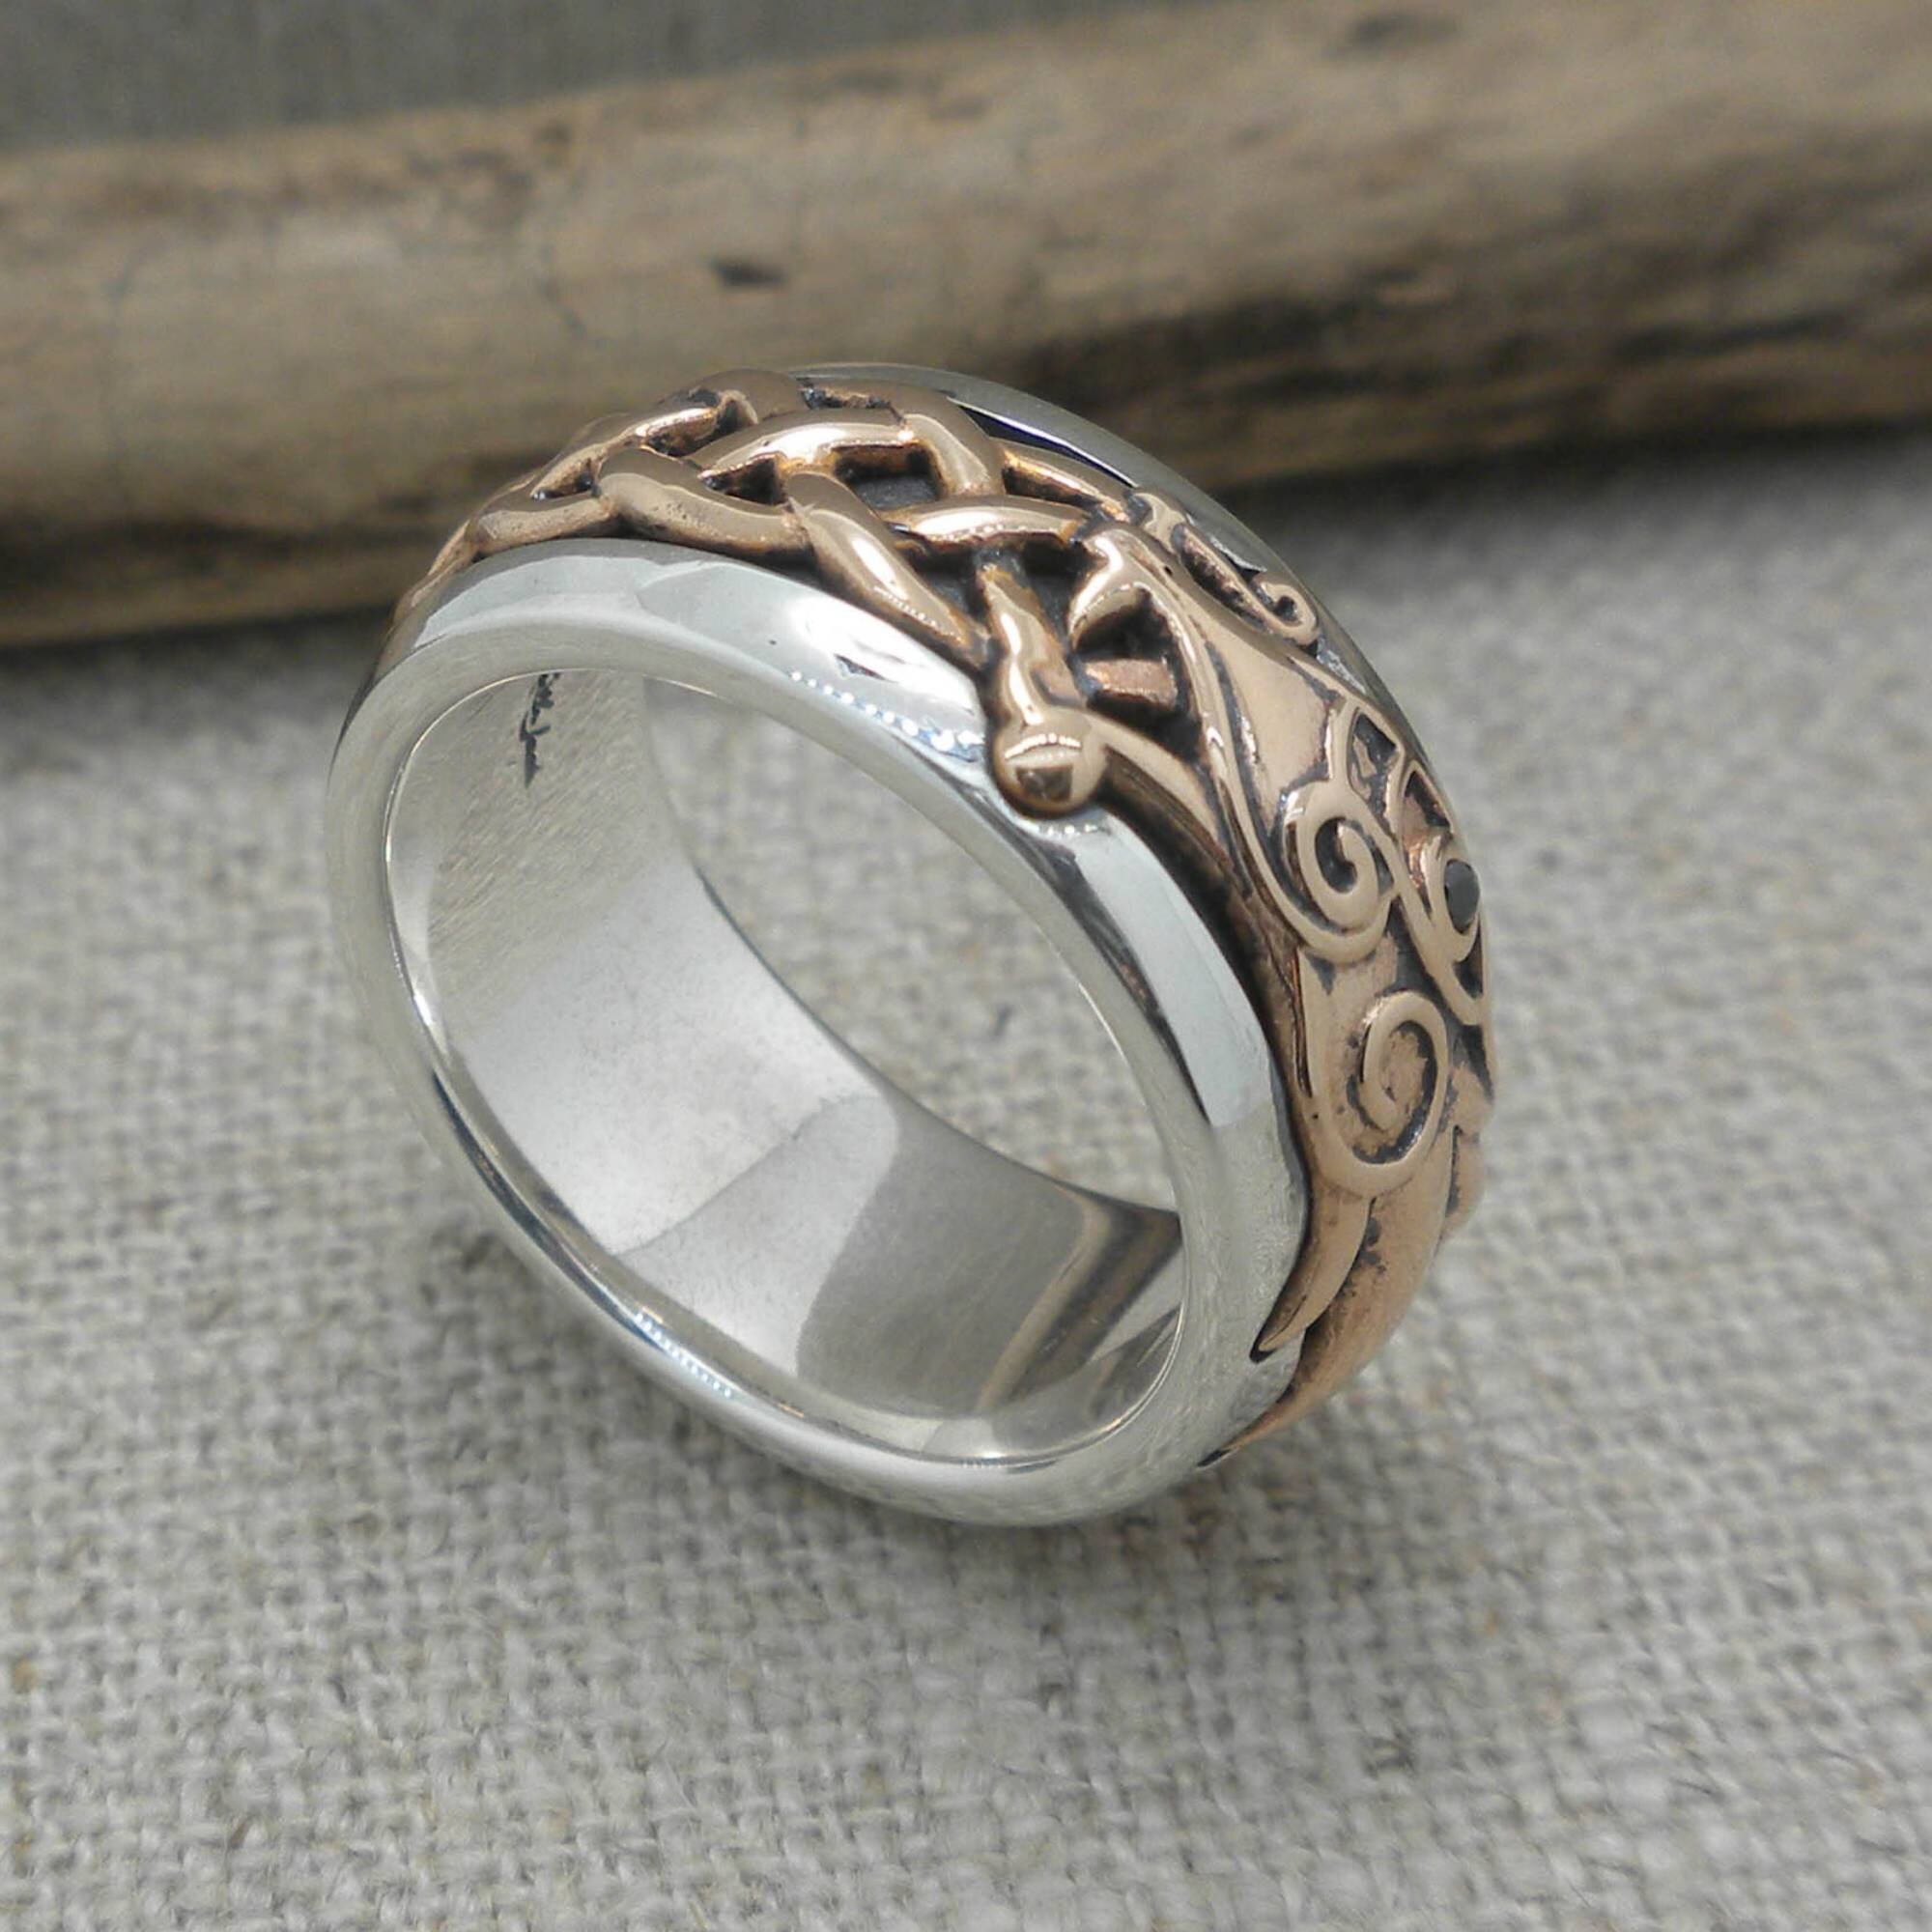 Petrichor Dragon Ring by Keith Jack Jewelry